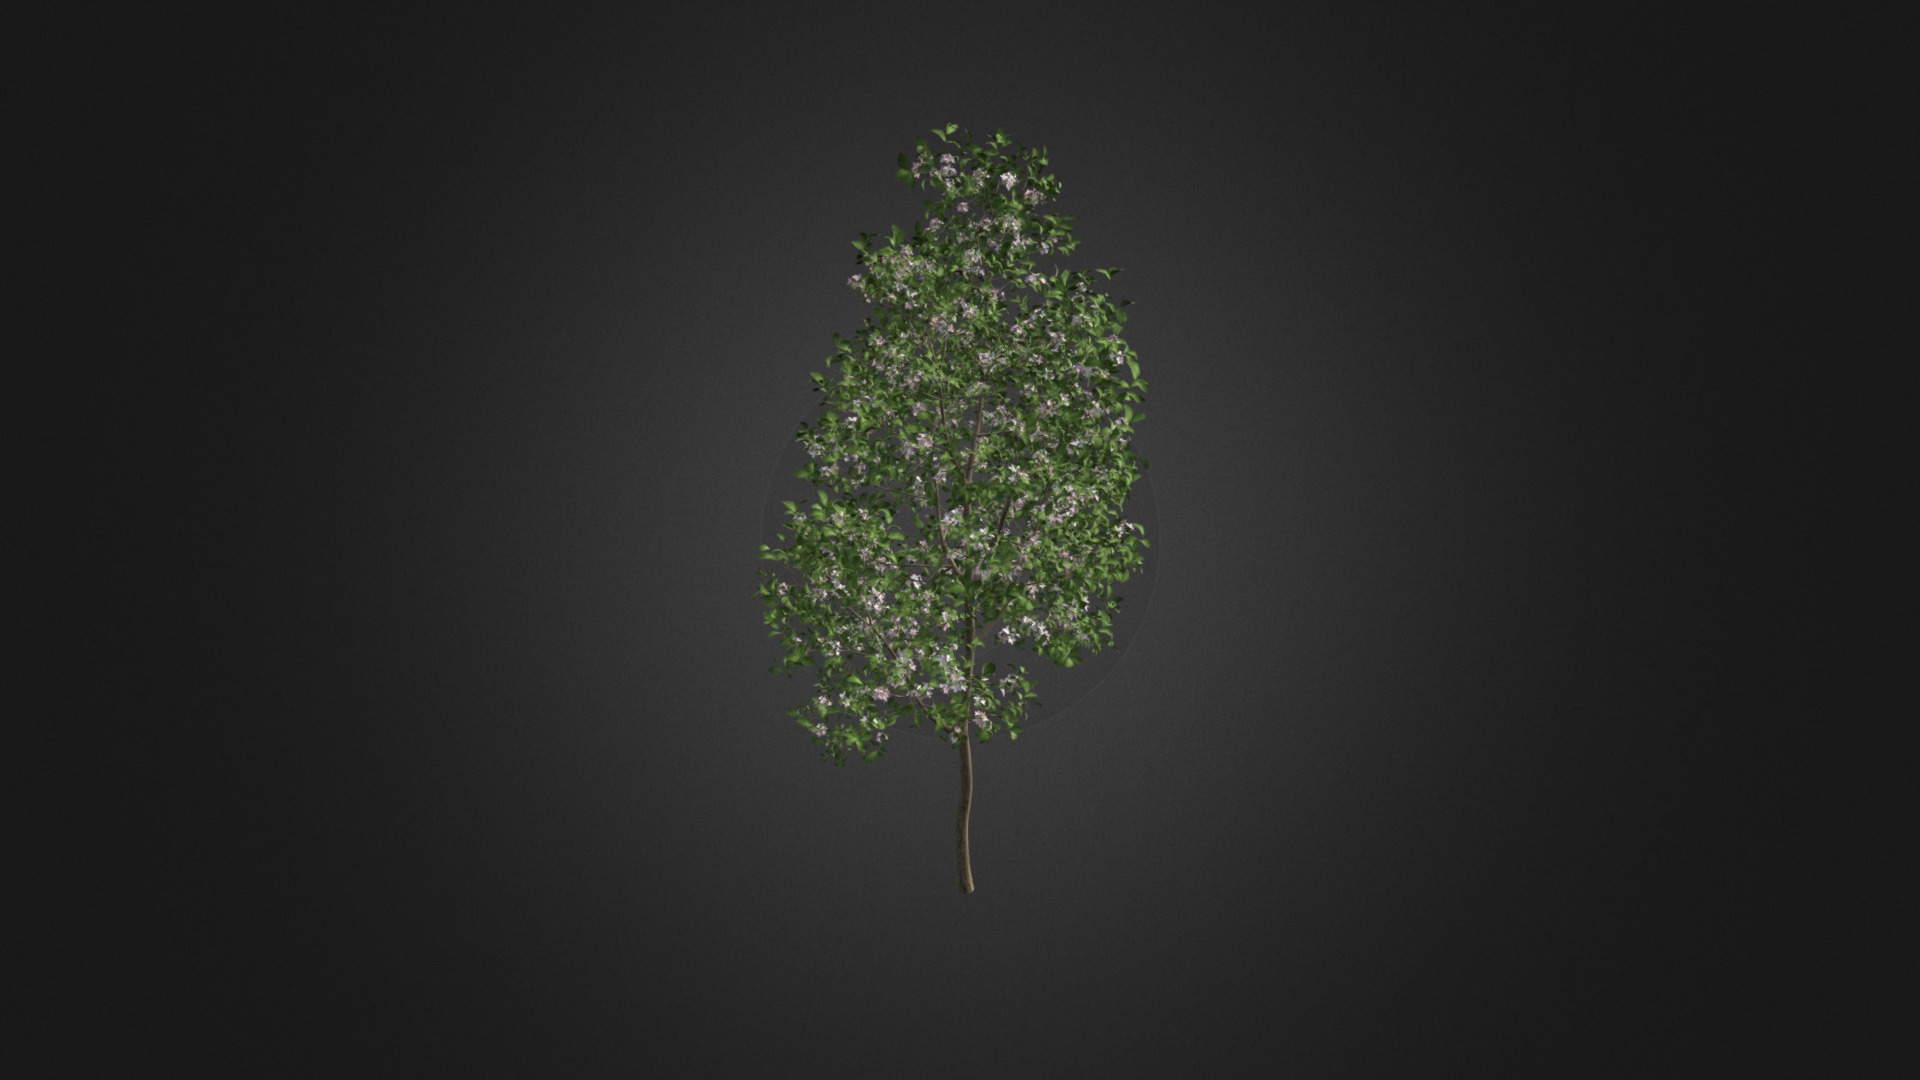 3D model Apple Tree with Flowers 3D Model 3.8m - This is a 3D model of the Apple Tree with Flowers 3D Model 3.8m. The 3D model is about a tree with green leaves.